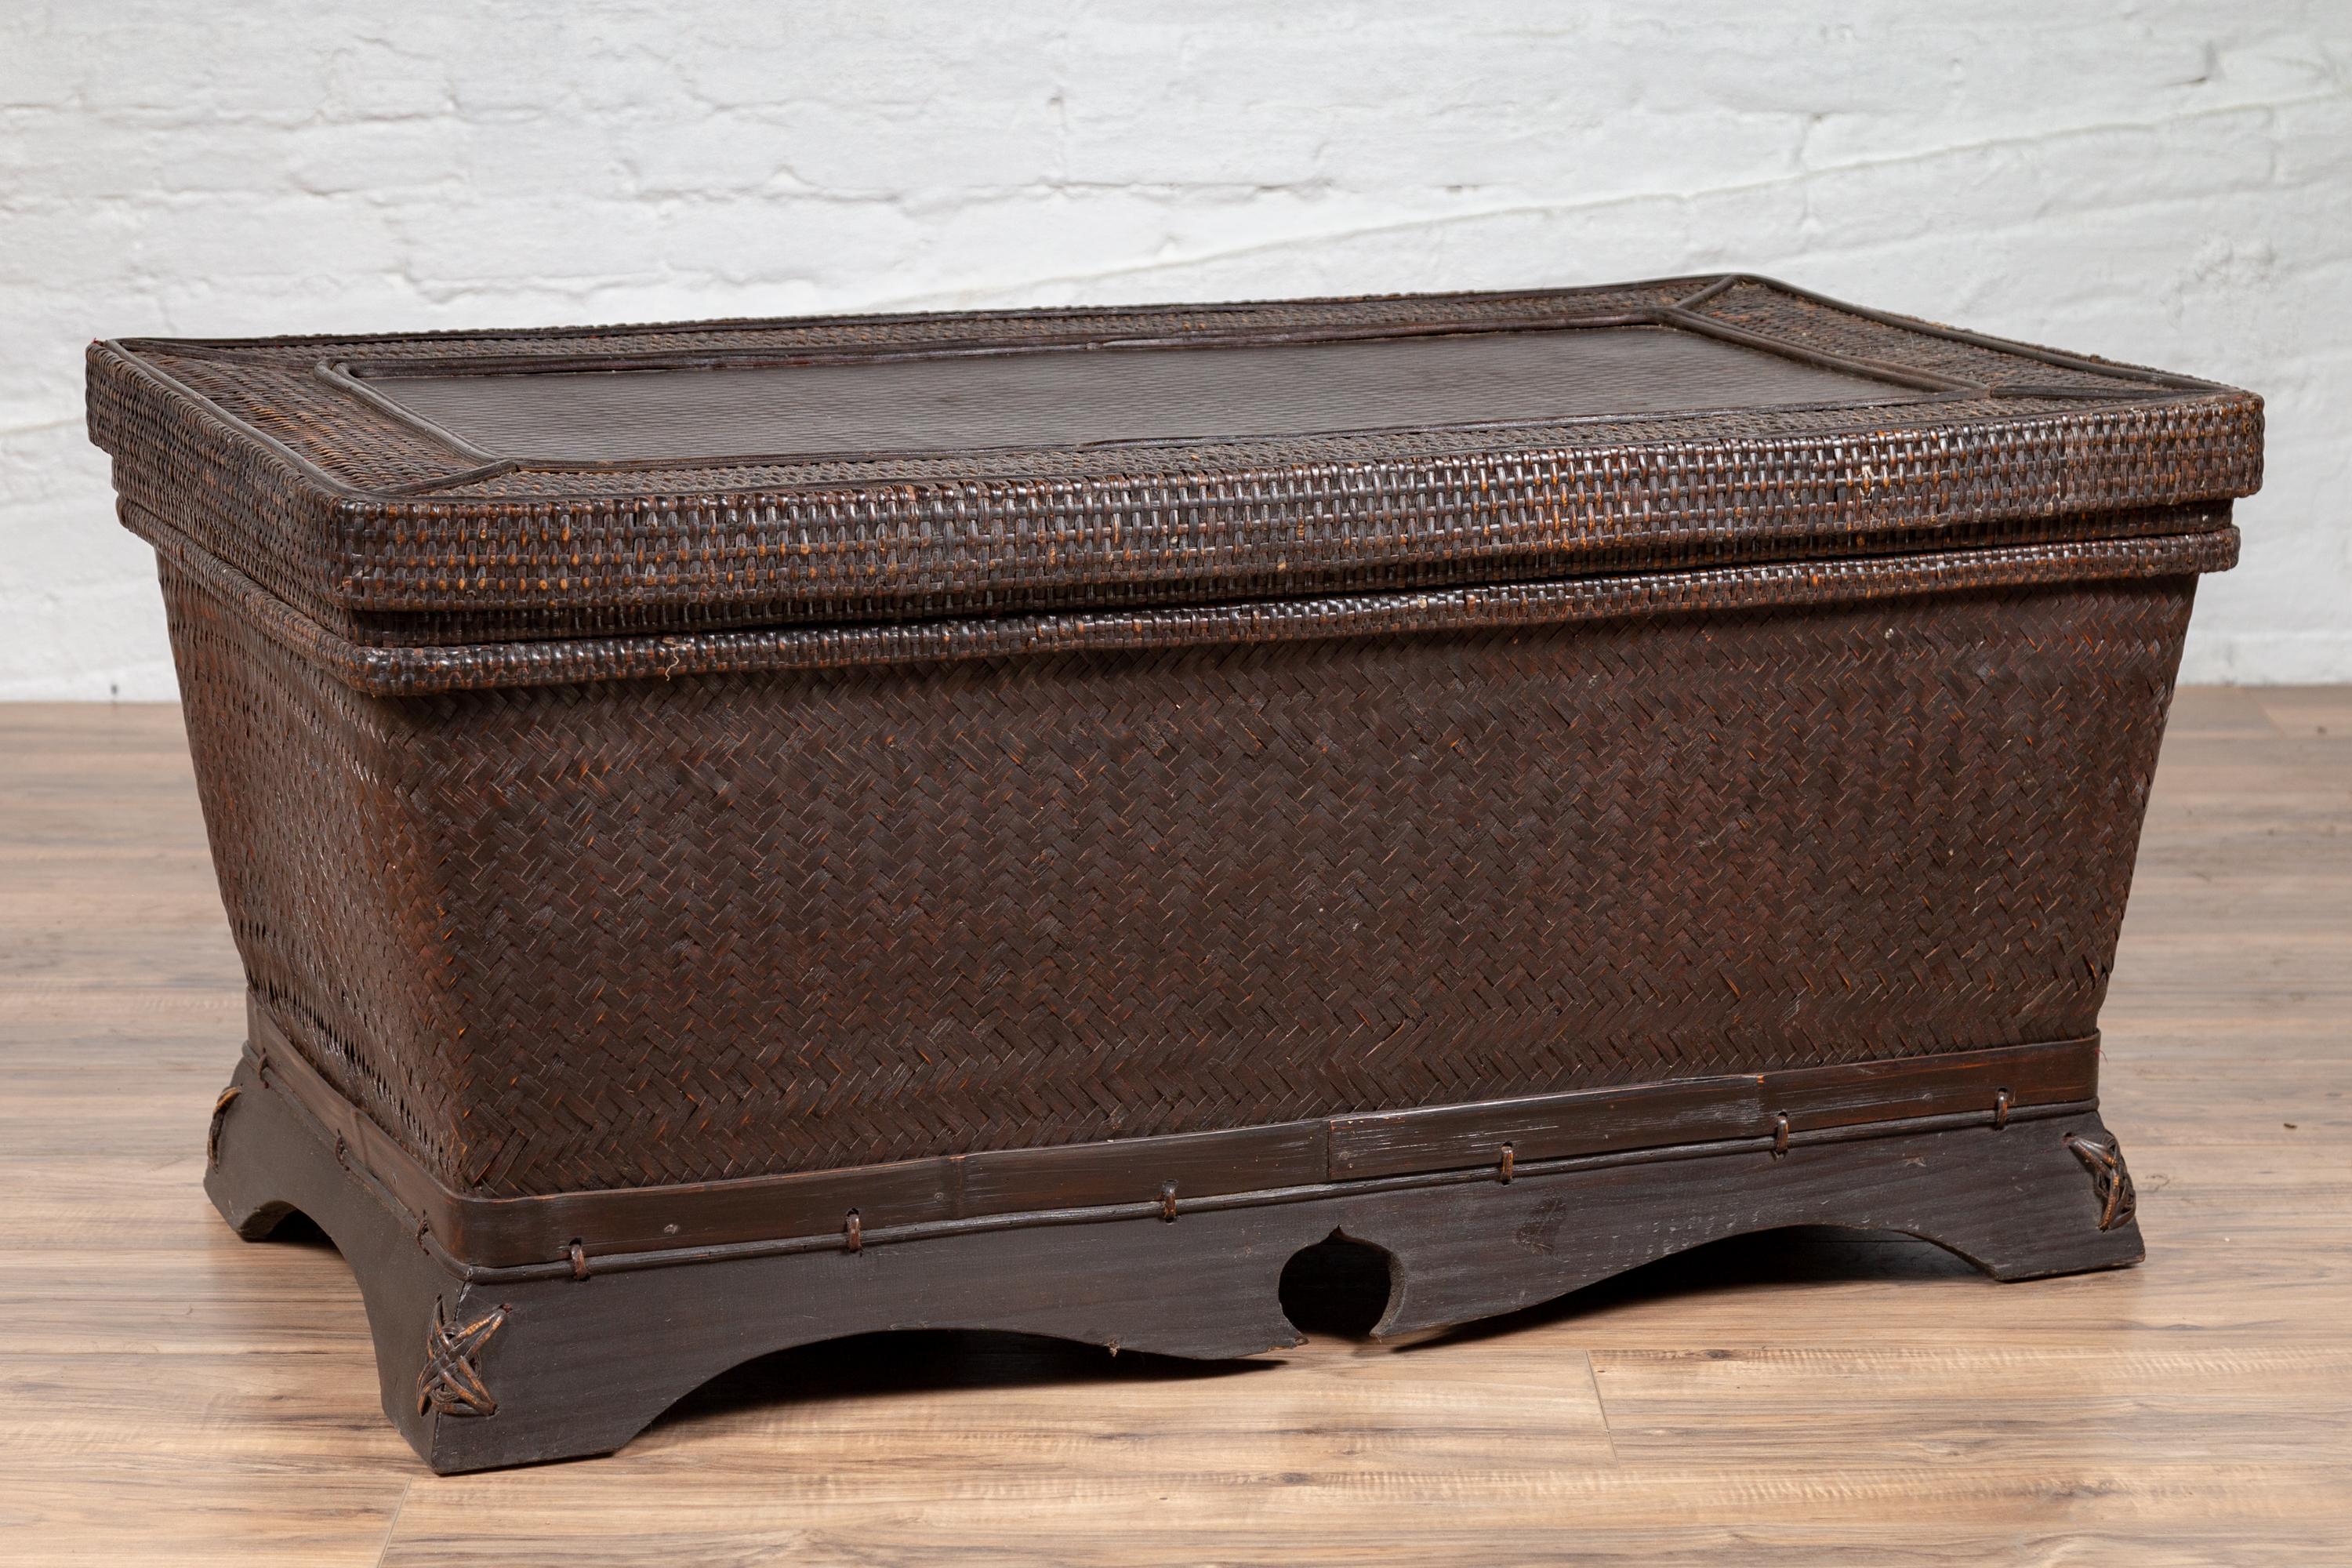 A Chinese antique basket coffee table from the early 20th century, made of dark brown woven rattan over wood. Born in China during the early years of the 20th century, this charming basket will make for an excellent coffee table. Presenting woven